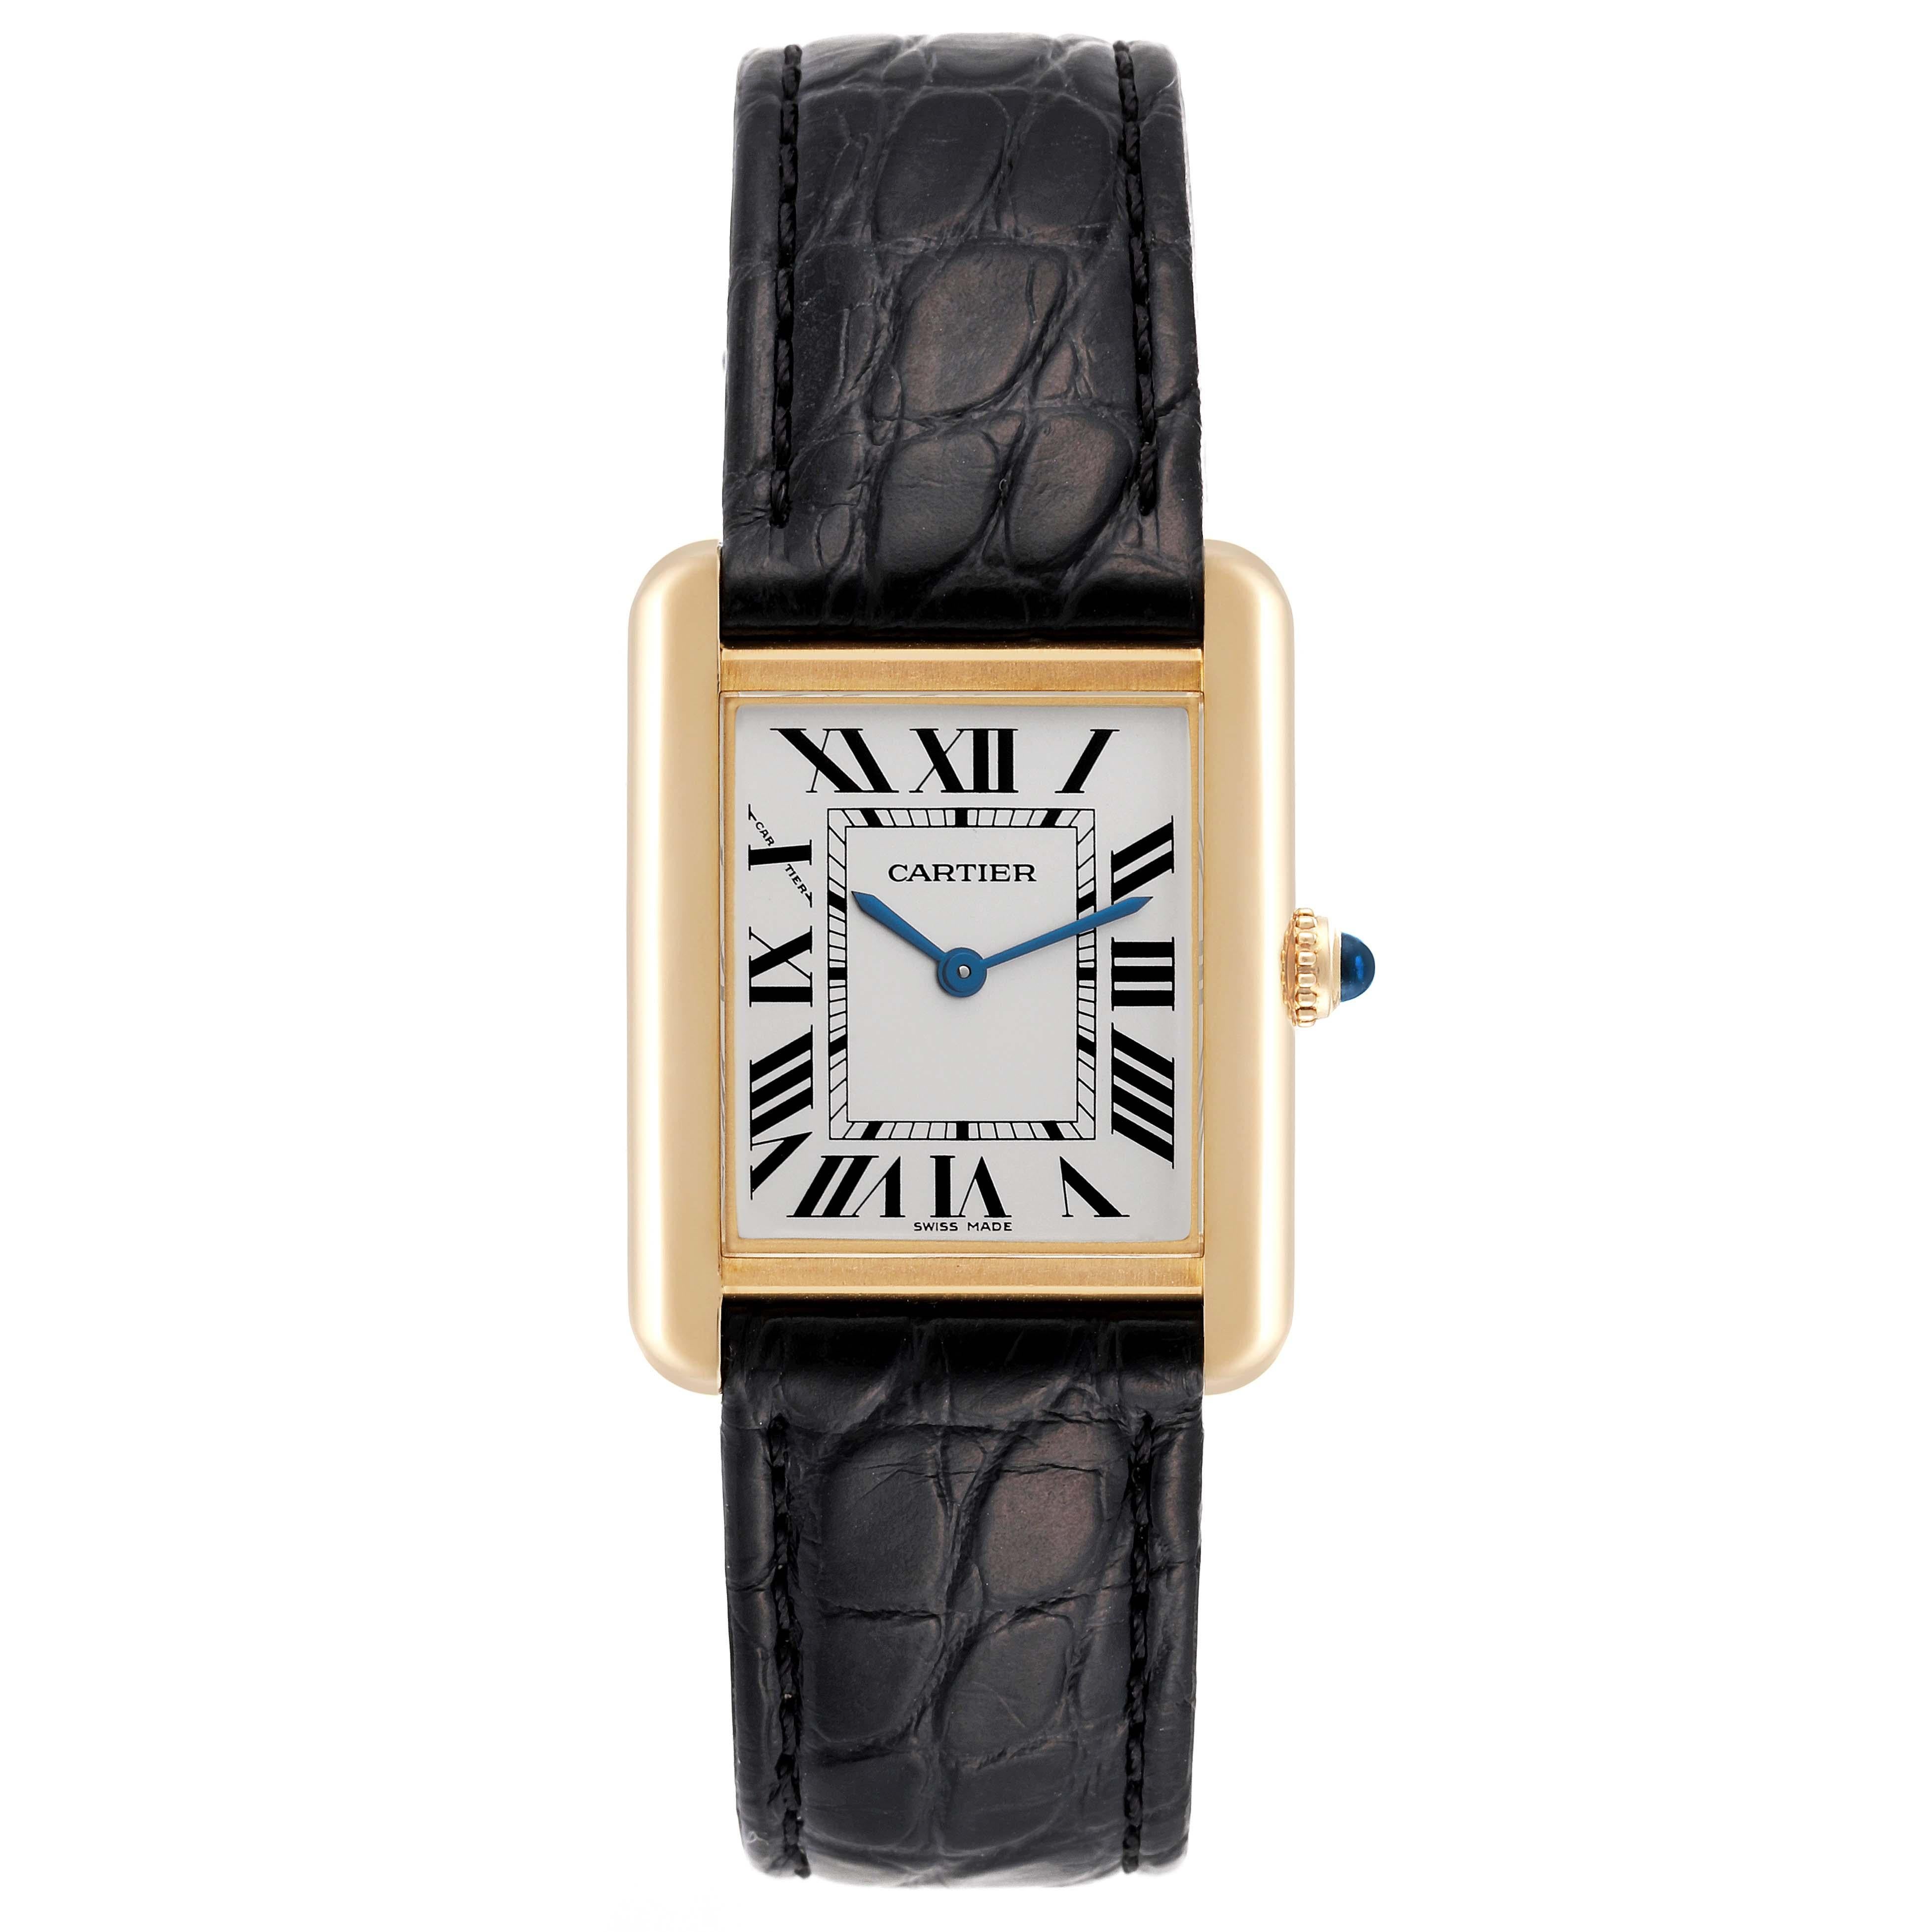 Cartier Tank Solo Small Yellow Gold Steel Silver Dial Ladies Watch W1018755. Quartz movement. 18k yellow gold case 30 x 23 mm. Stainless steel case back. Circular grained crown set with a blue spinel cabochon. . Scratch resistant sapphire crystal.